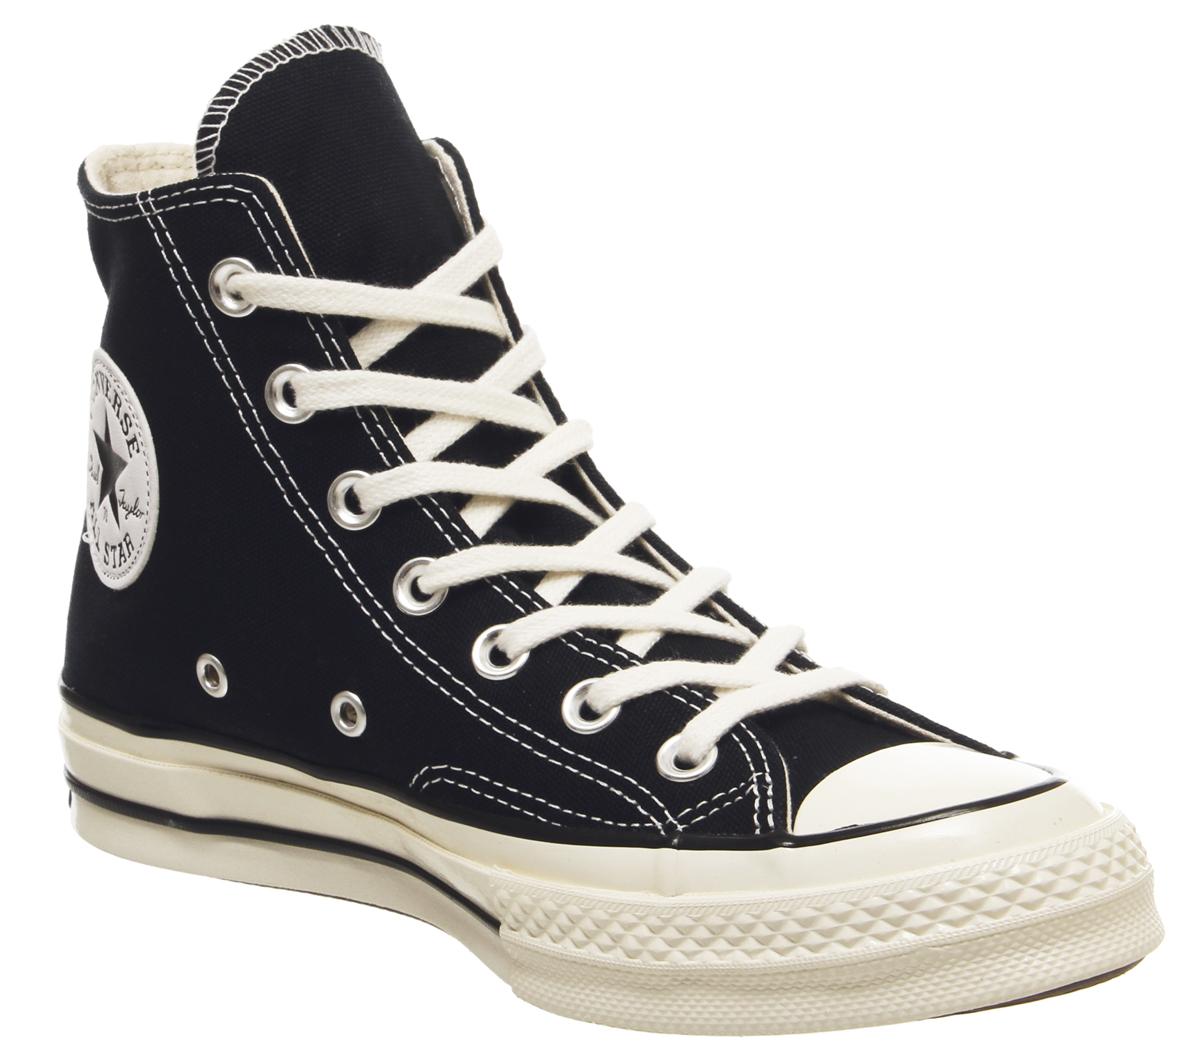 Converse All Star Hi 70's Trainers Black - His trainers